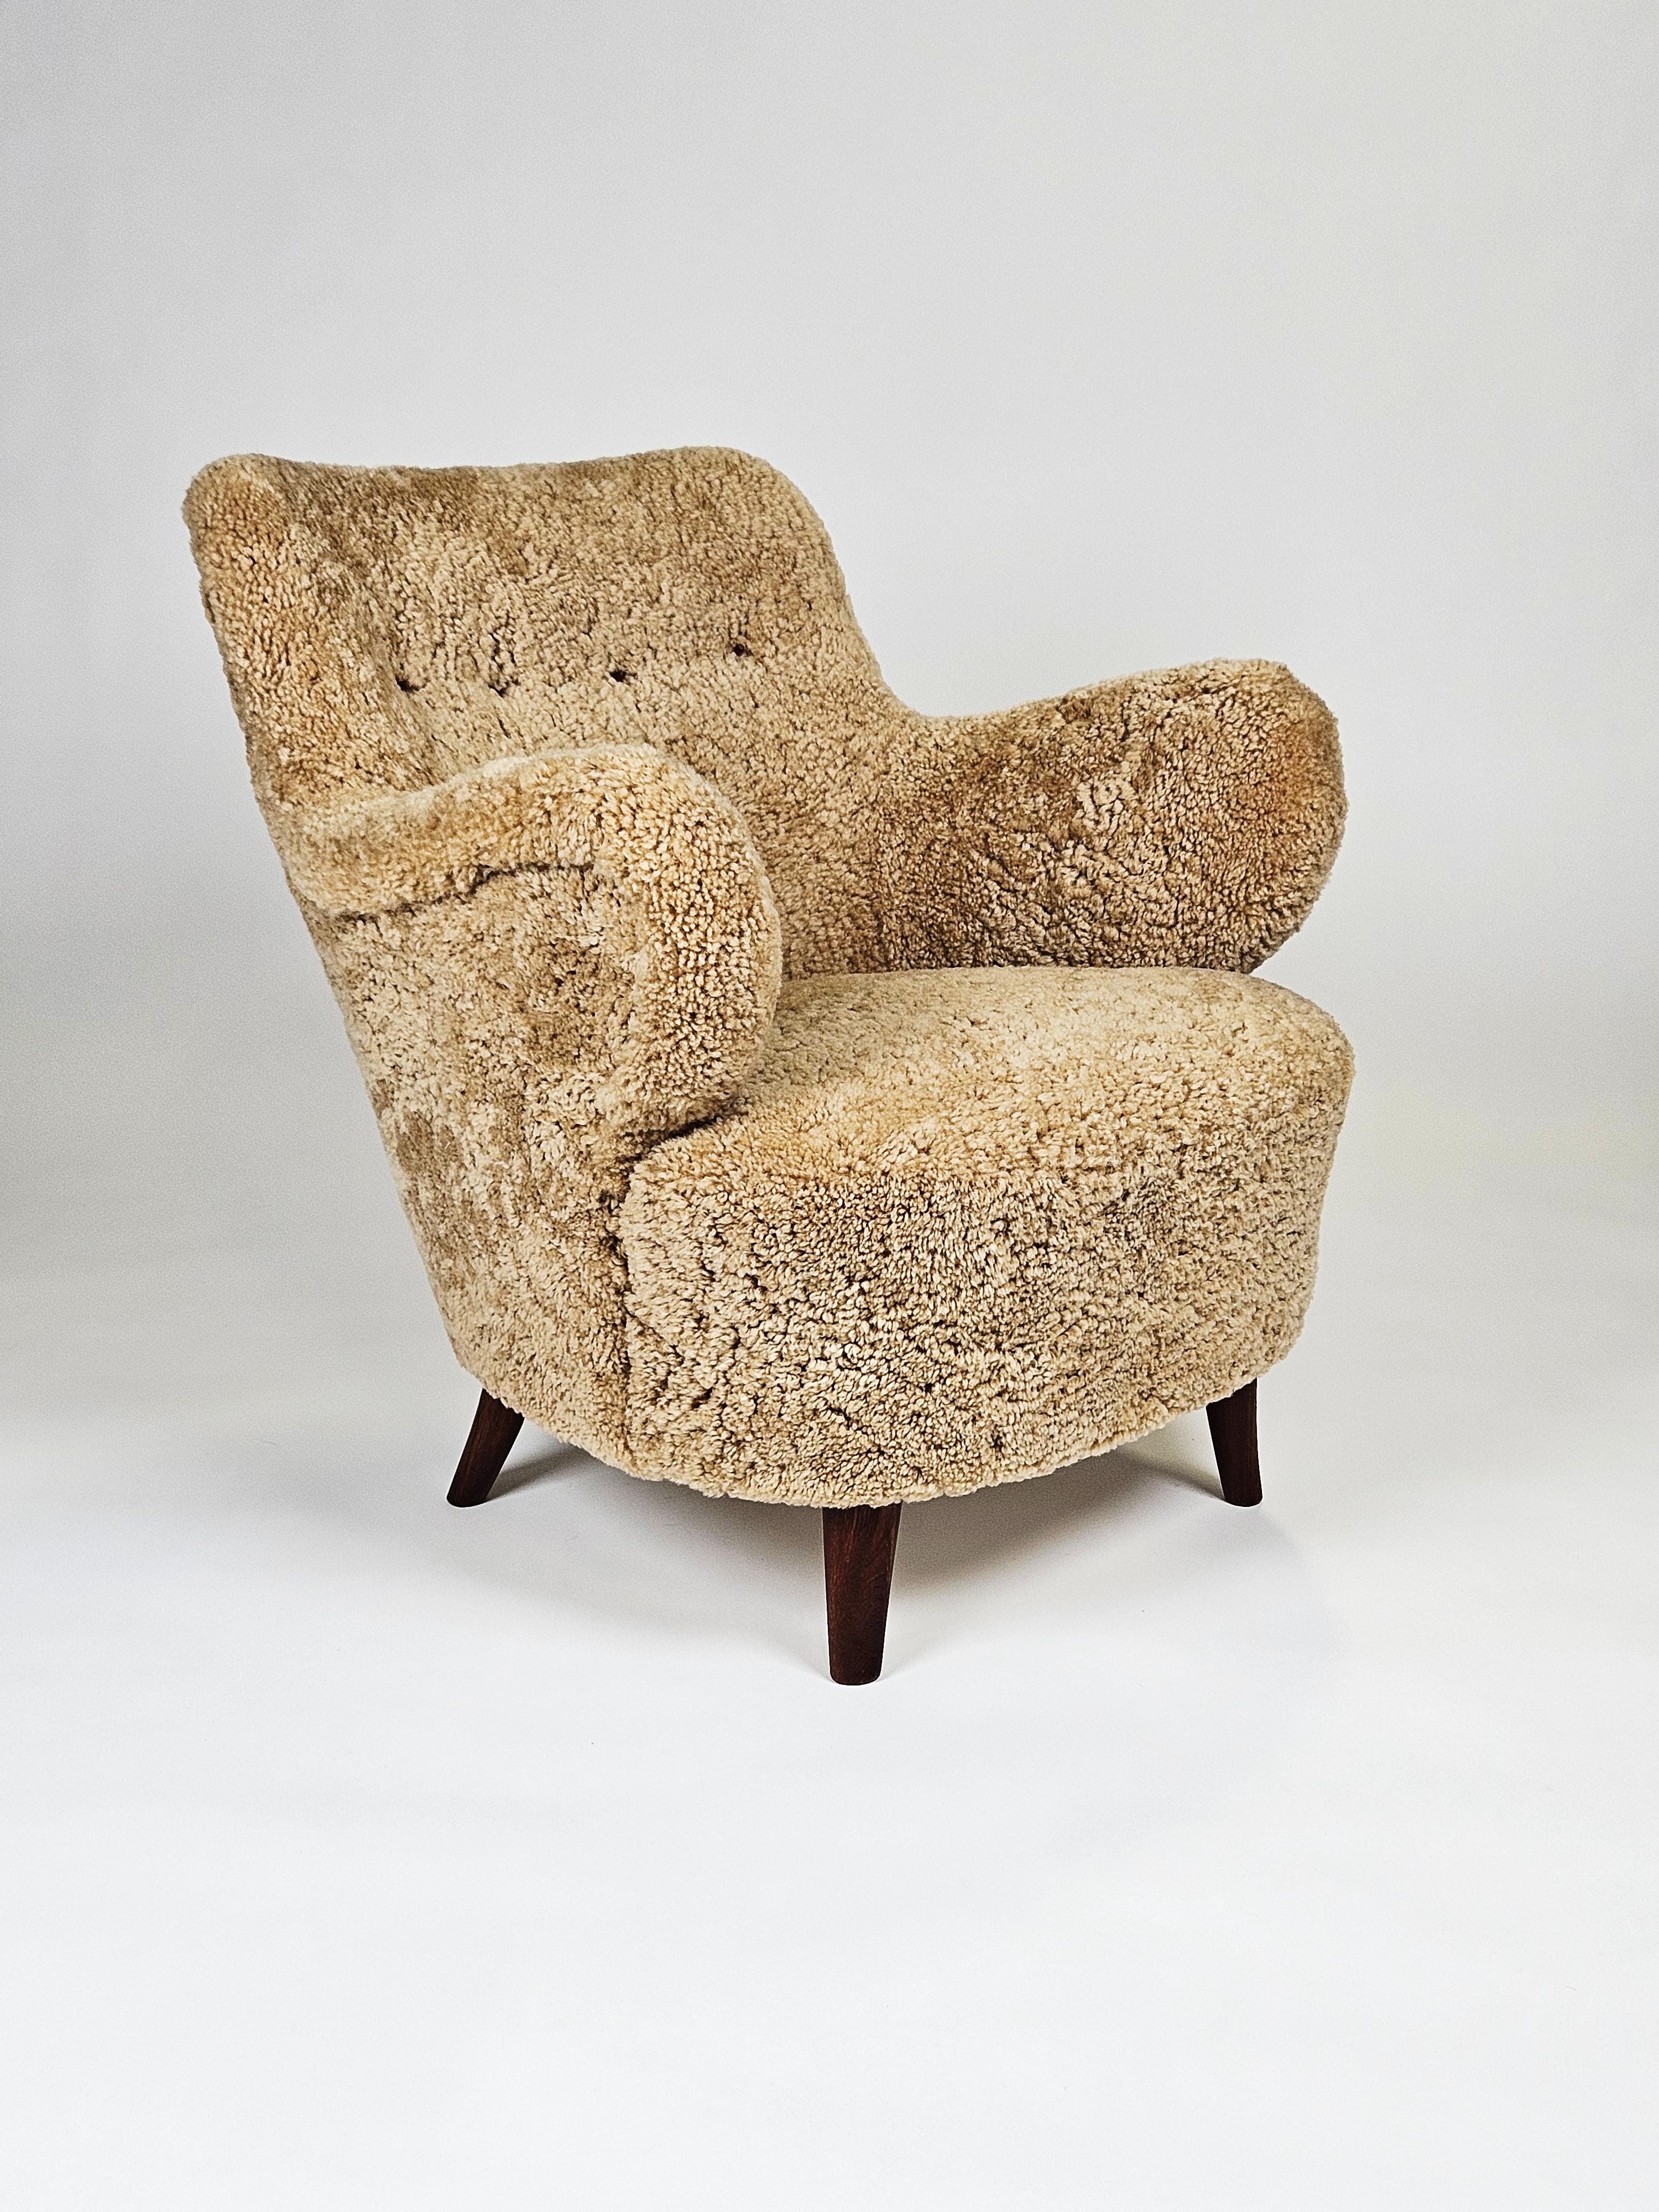 Very rare Swedish Modern lounge chair by Gustav Axel Berg, Sweden, 1940s For Sale 3